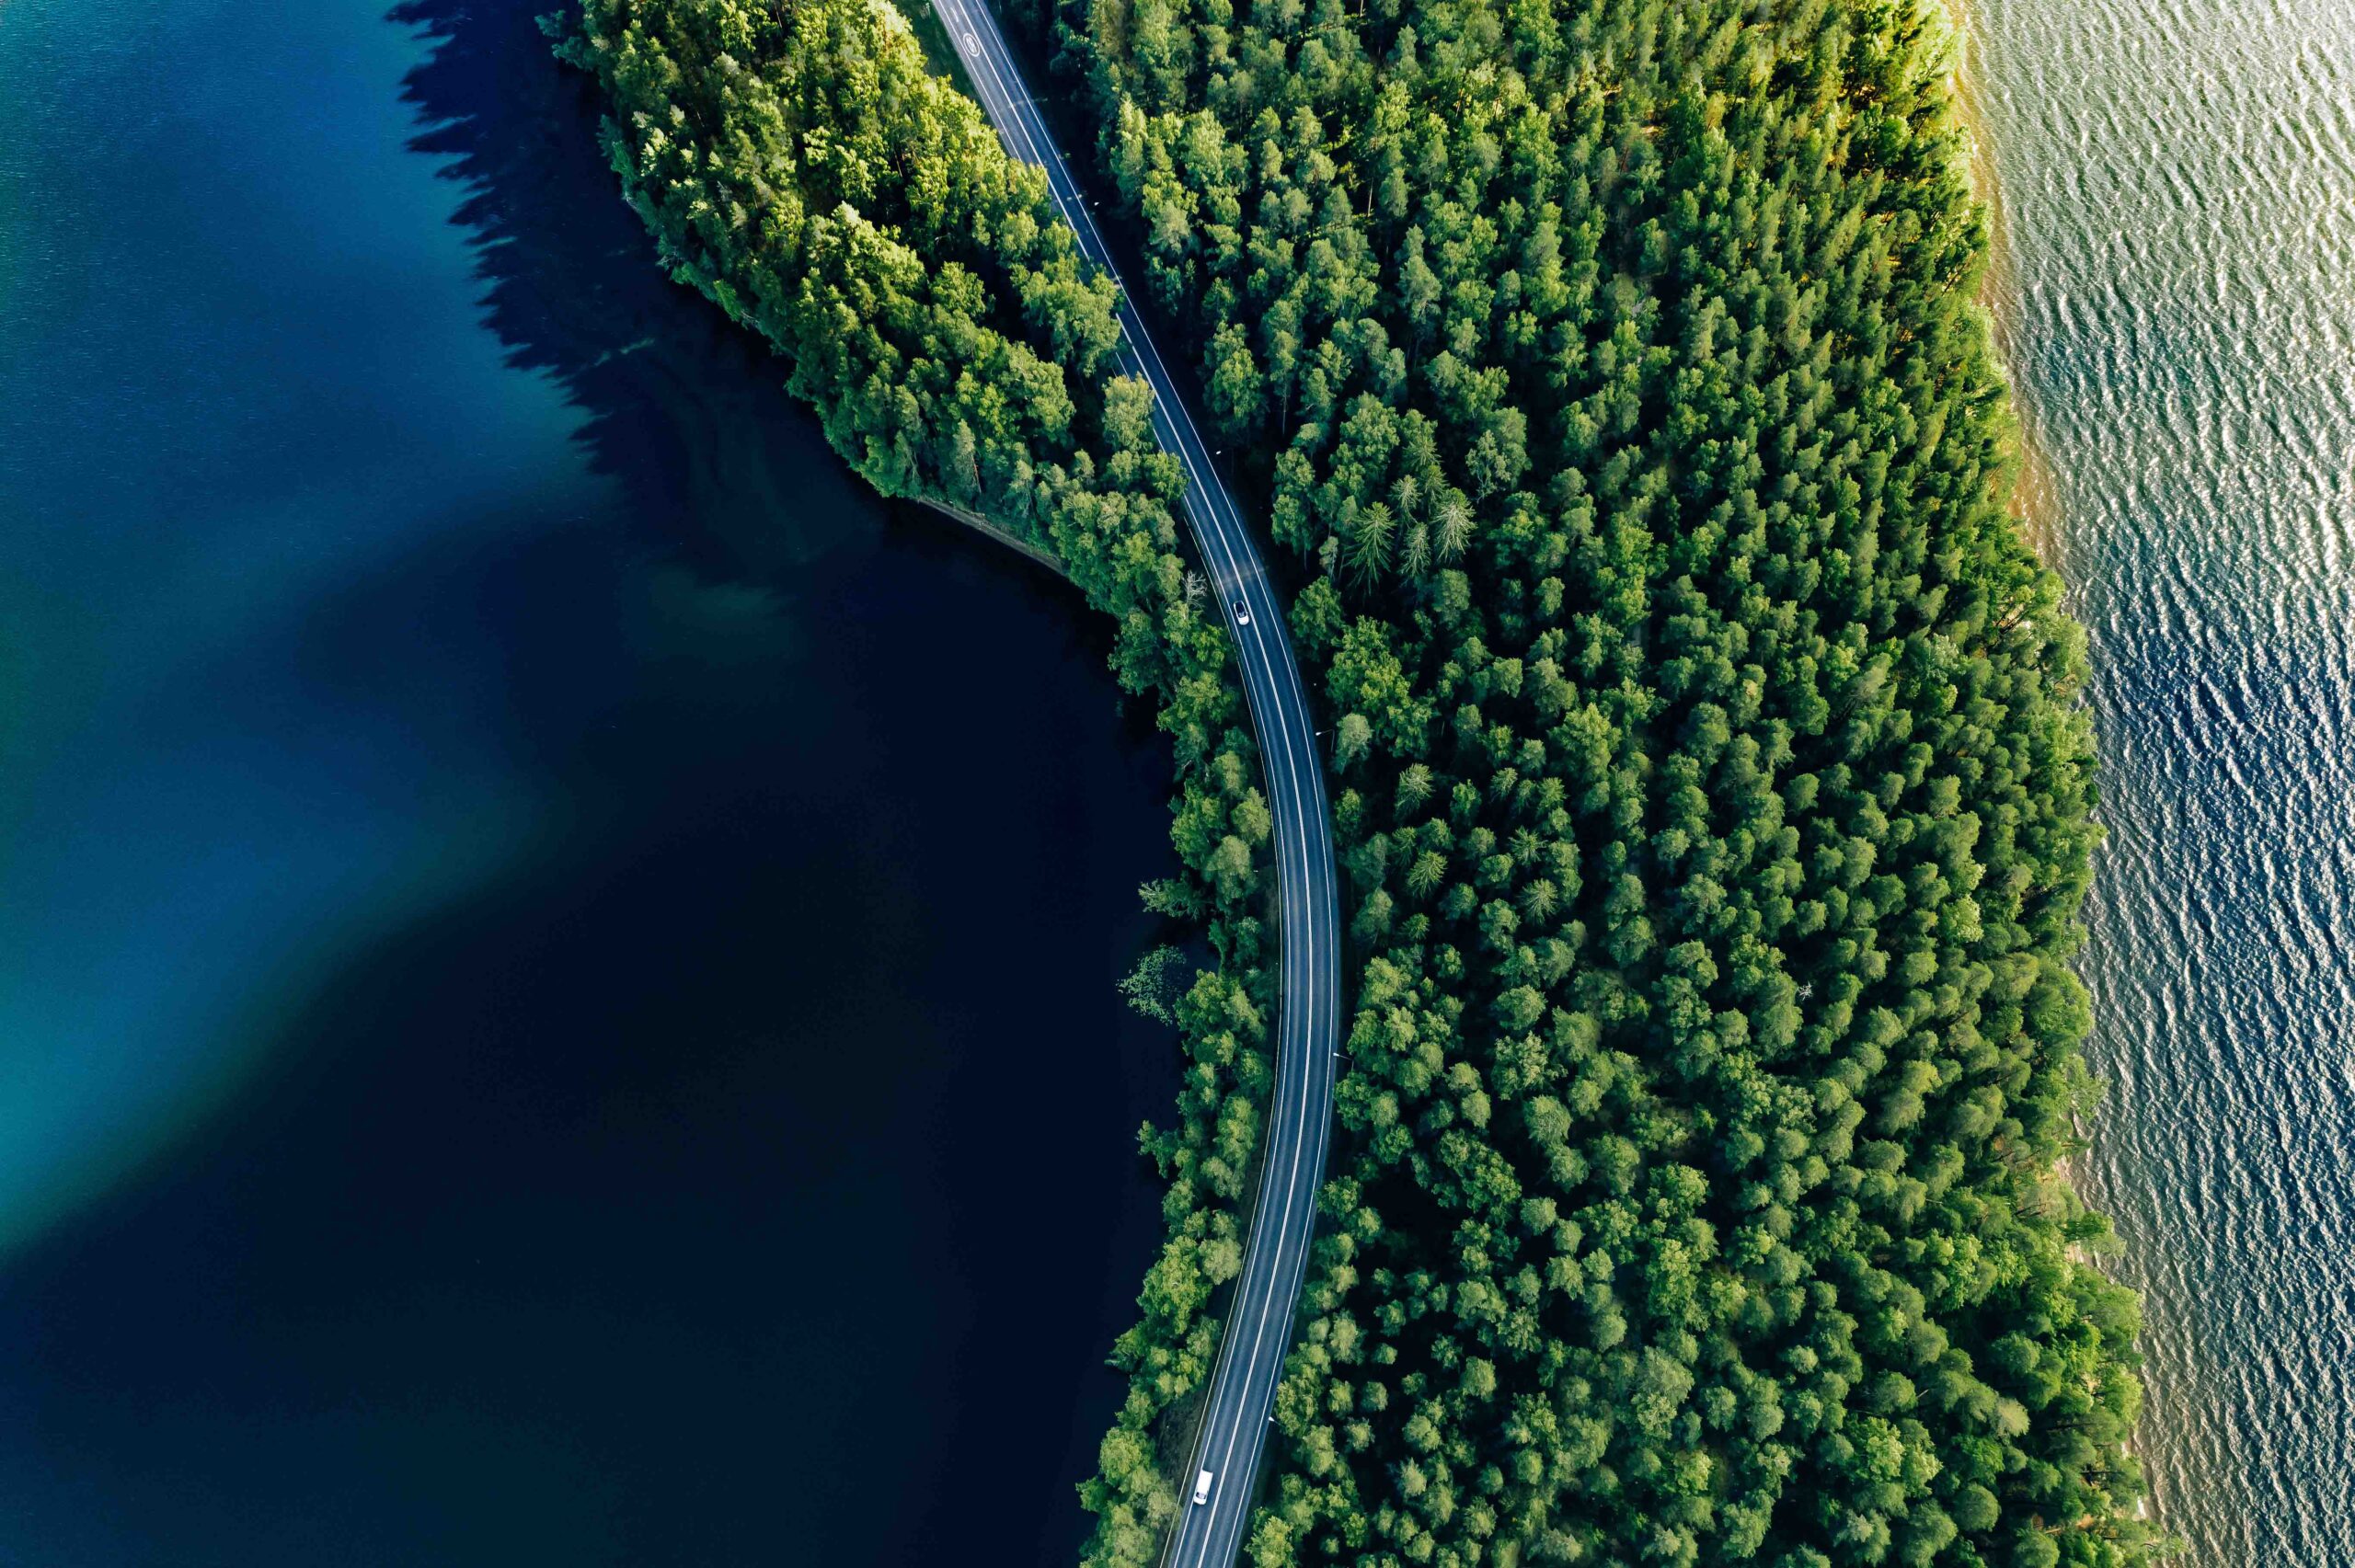 Sphera’s 2022 ESG Report Illustrates How the Company Is Optimizing Its Own ESG Performance While Supporting Its More Than 7,000 Customers in Operationalizing ESG